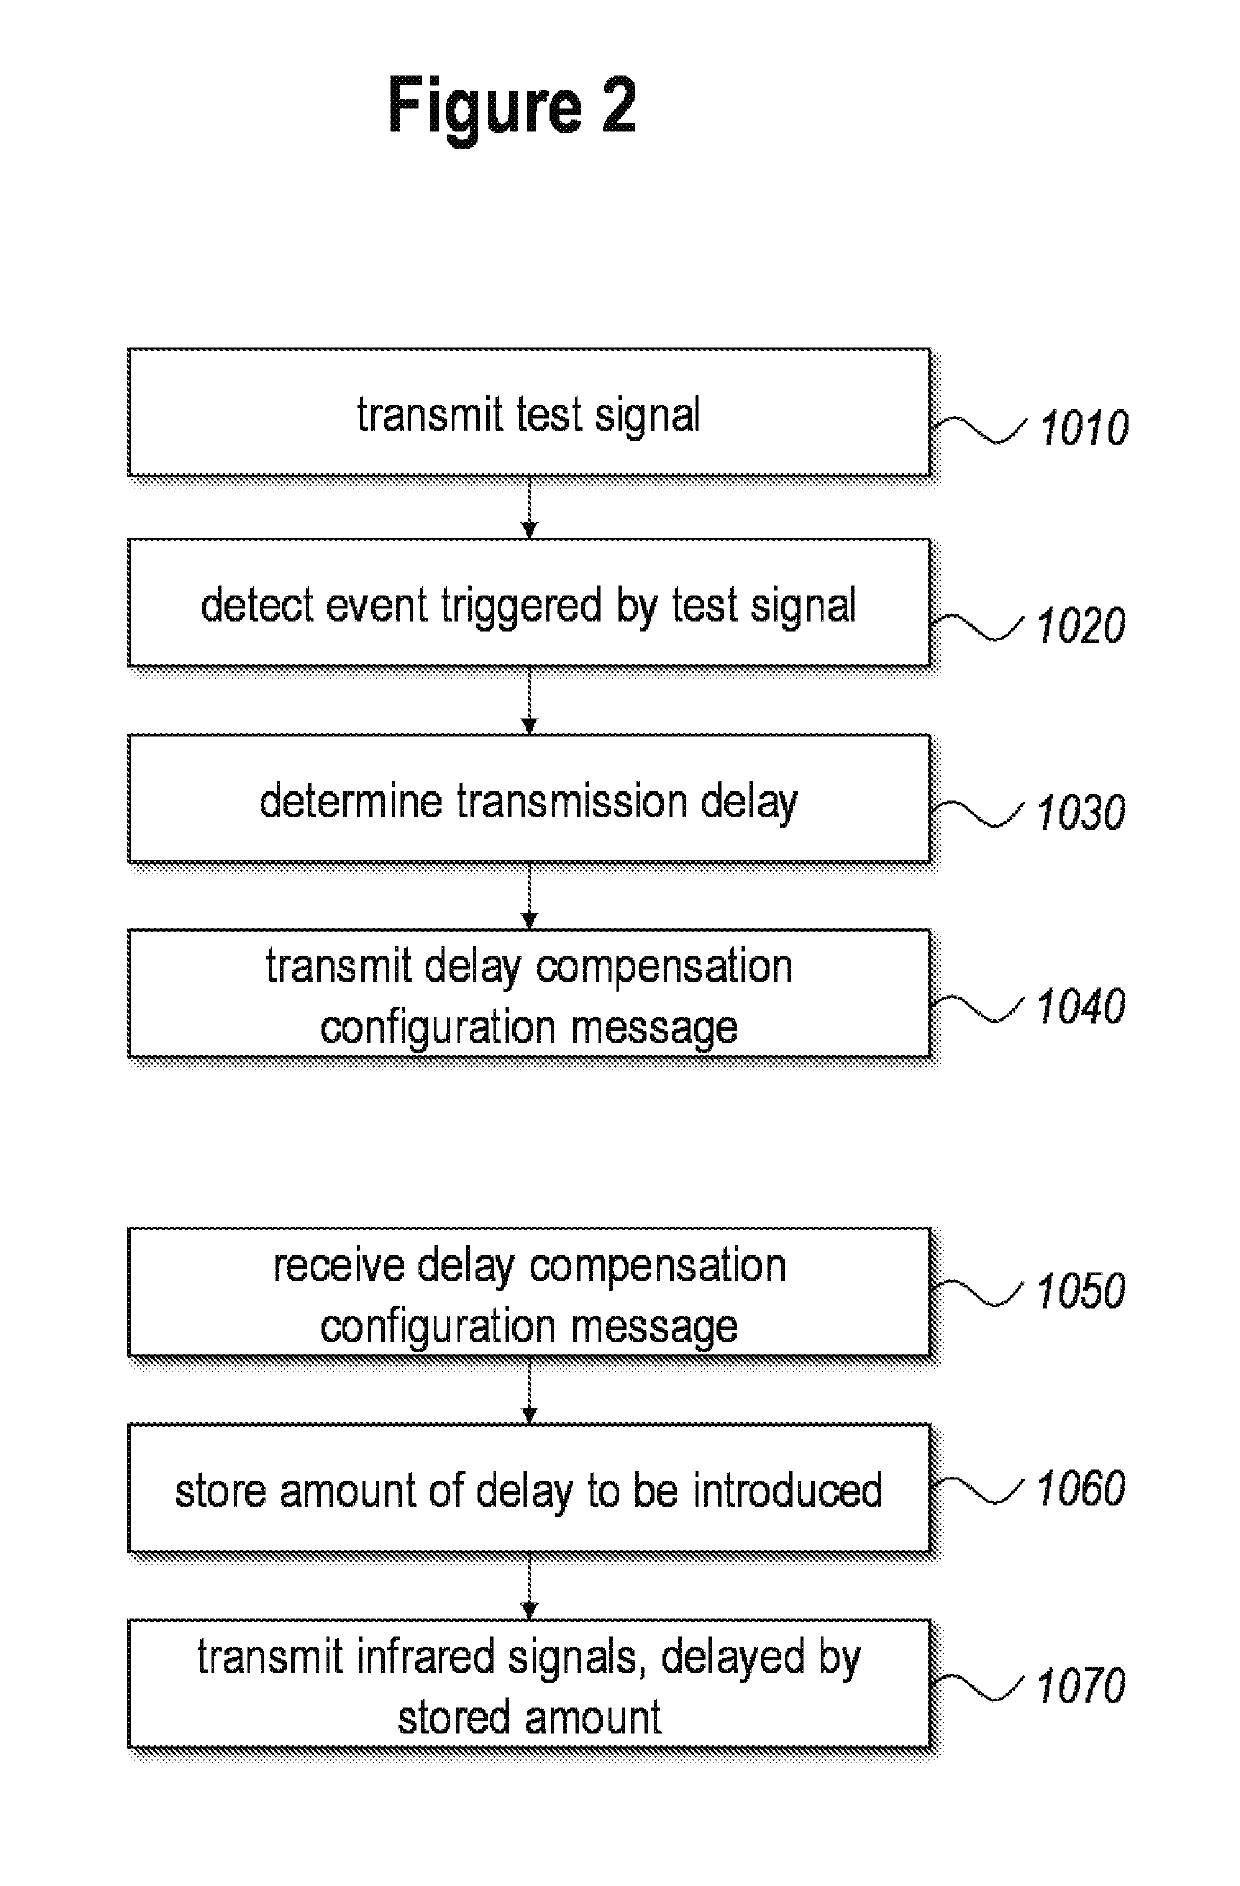 Method for configuring an infrared audio transmission system and apparatus for using it